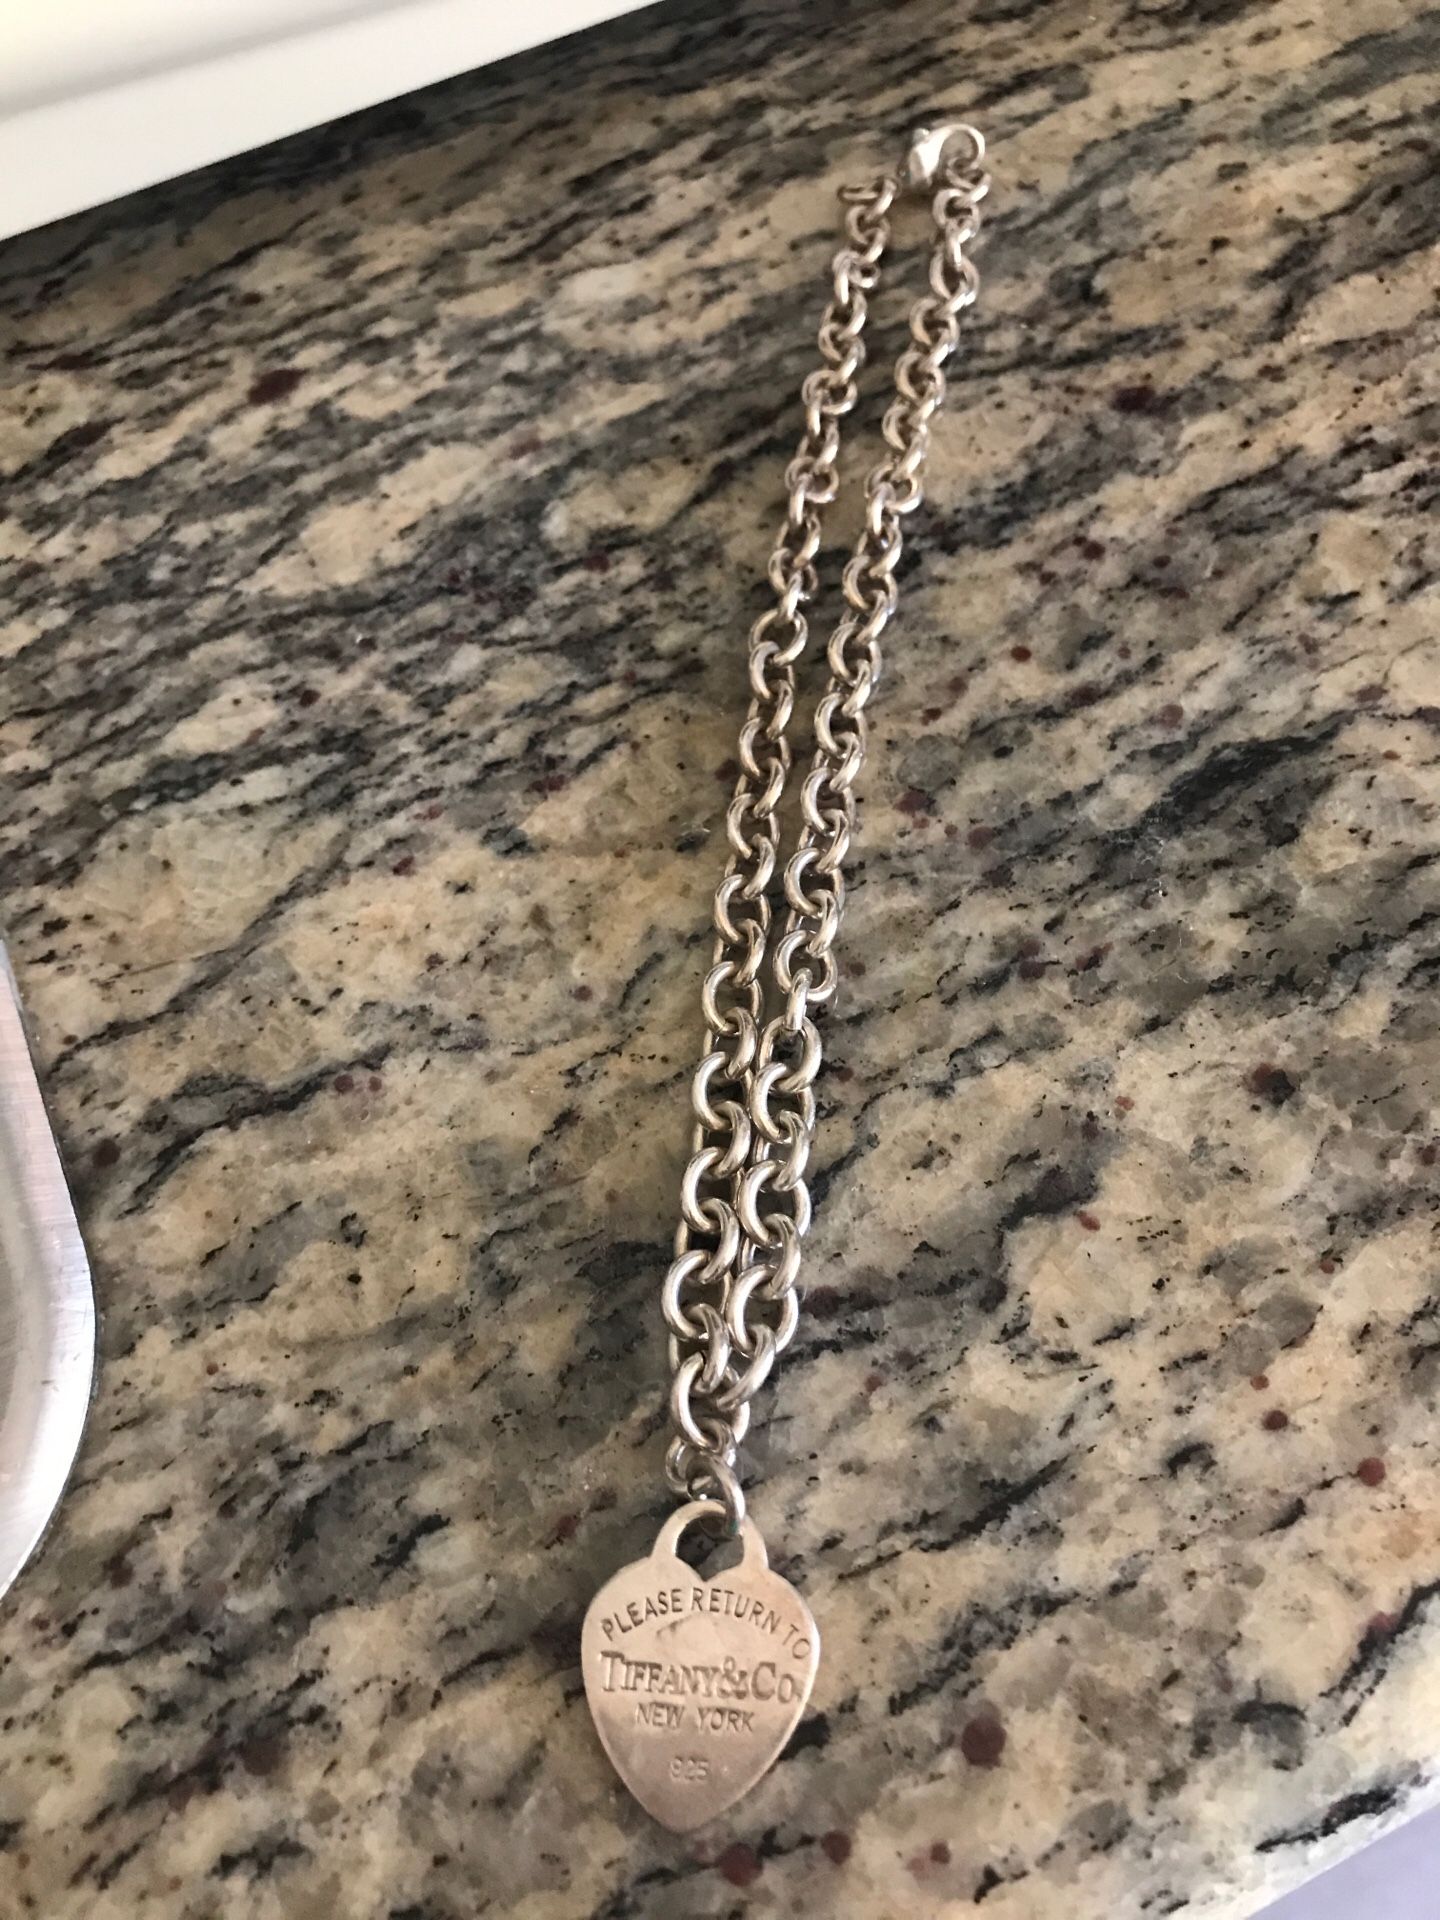 Authentic Tiffany necklace